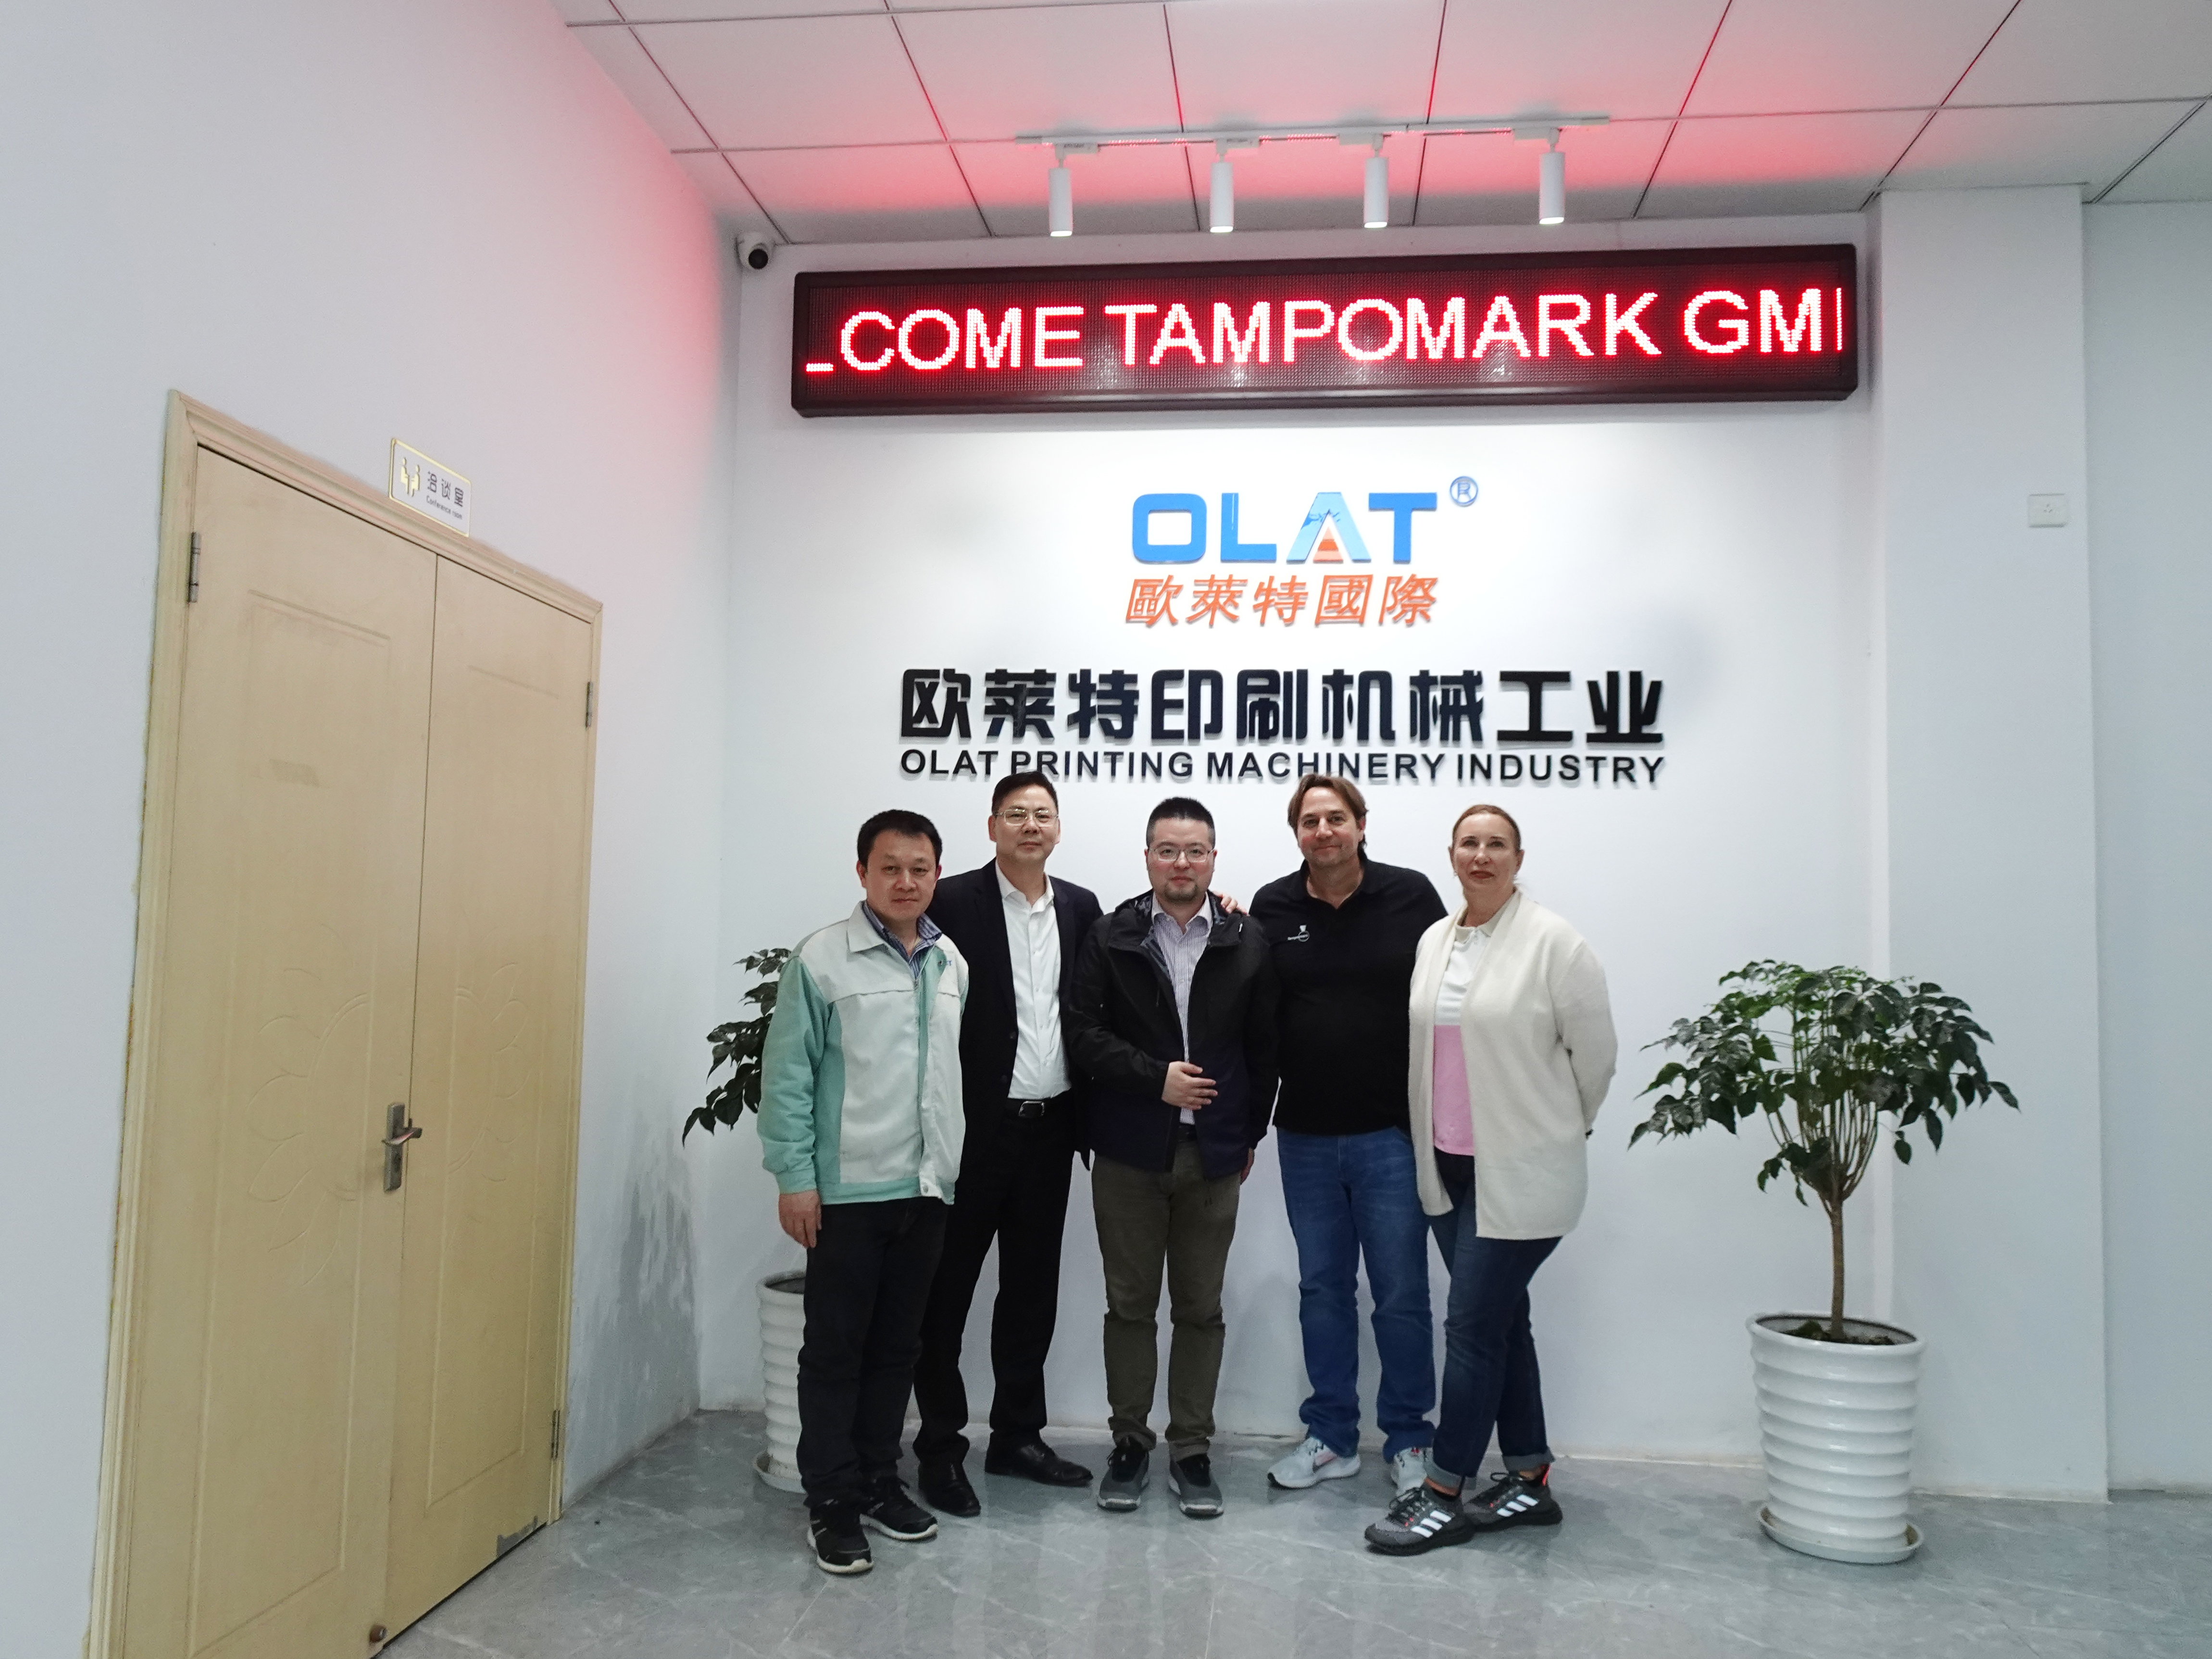 German Customer Visits Our Company to Explore Opportunities in Pad Printing Industry